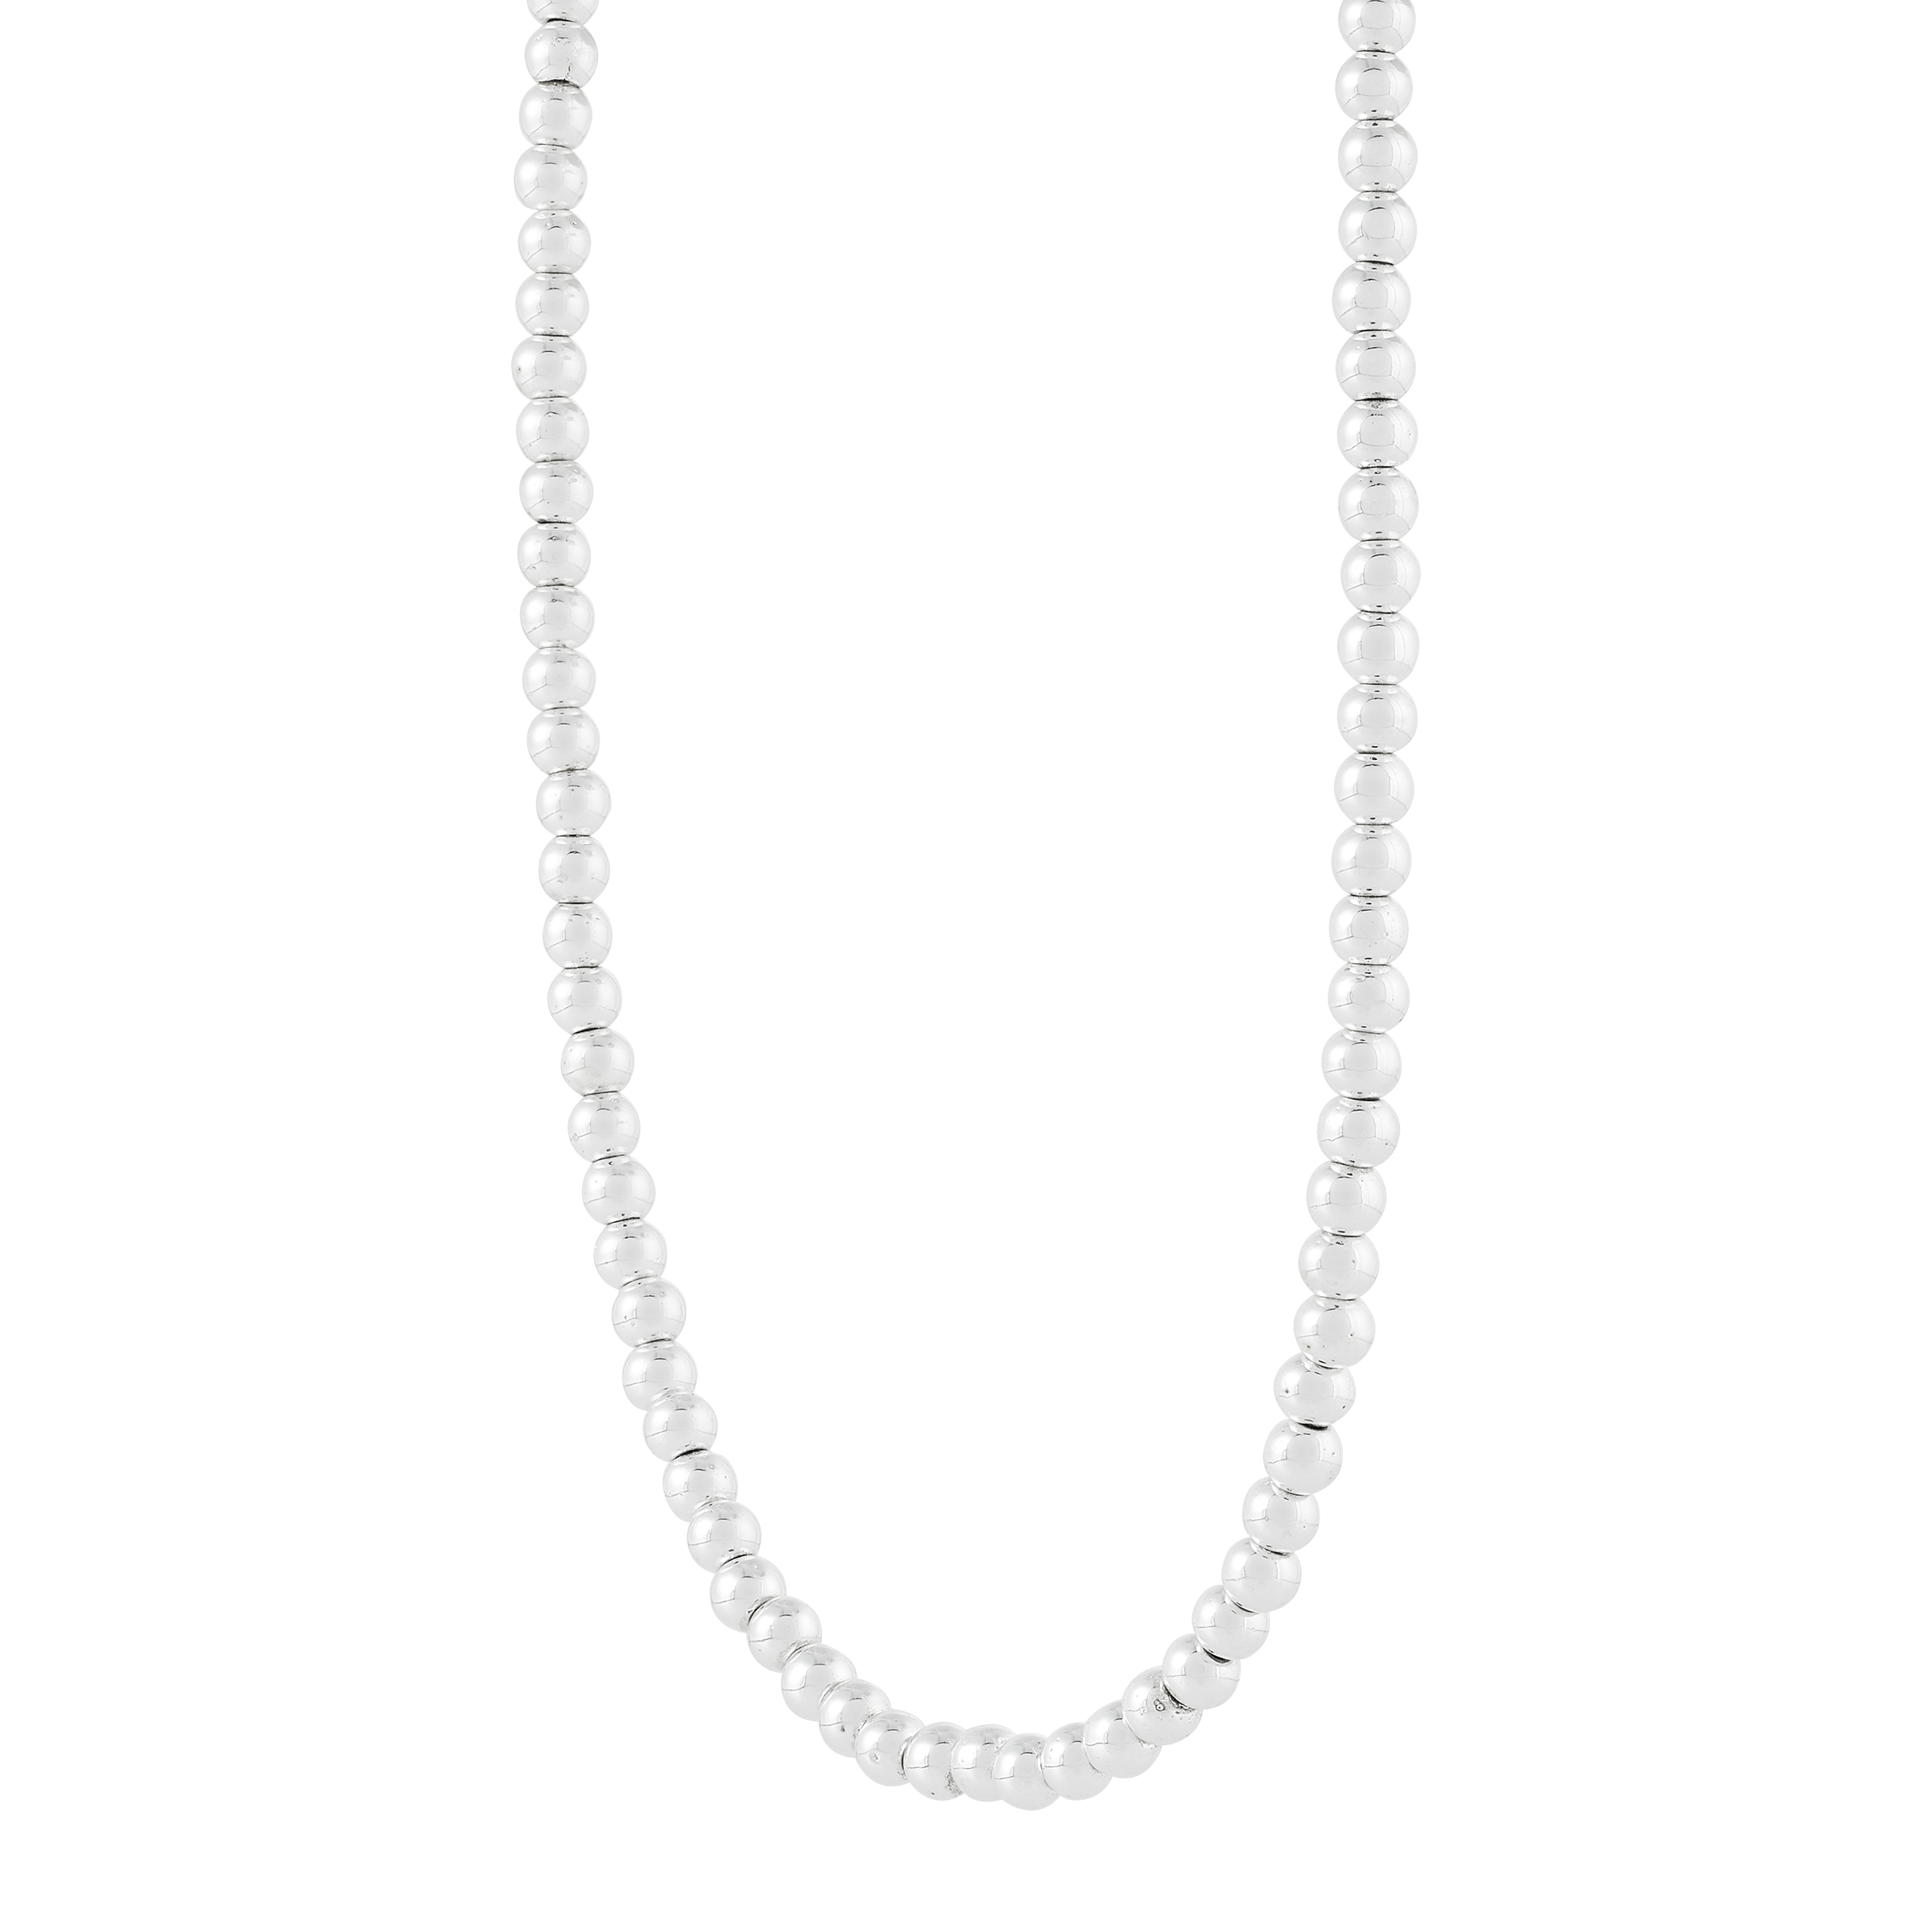 Silpada 'Falling Water' Sterling Silver Hematite Bead Necklace, 16